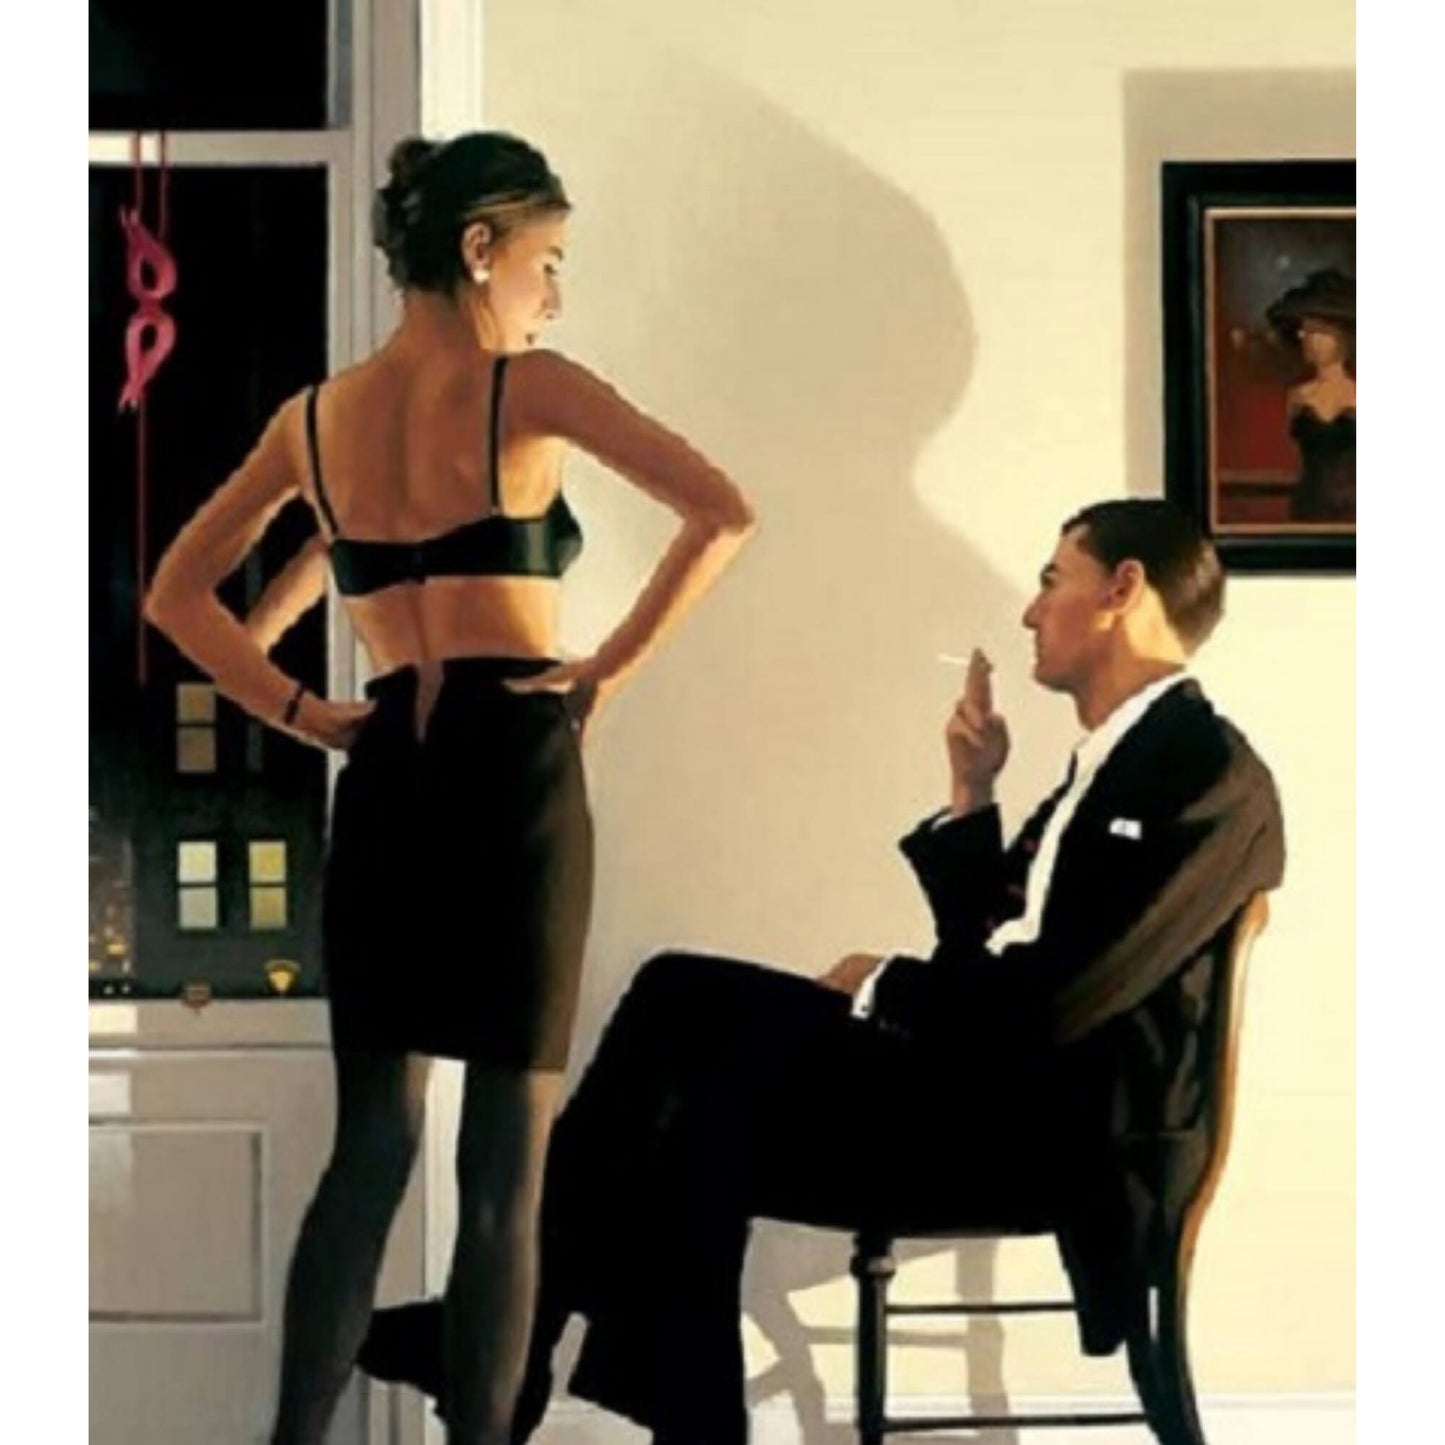 Night In The City by Jack Vettriano